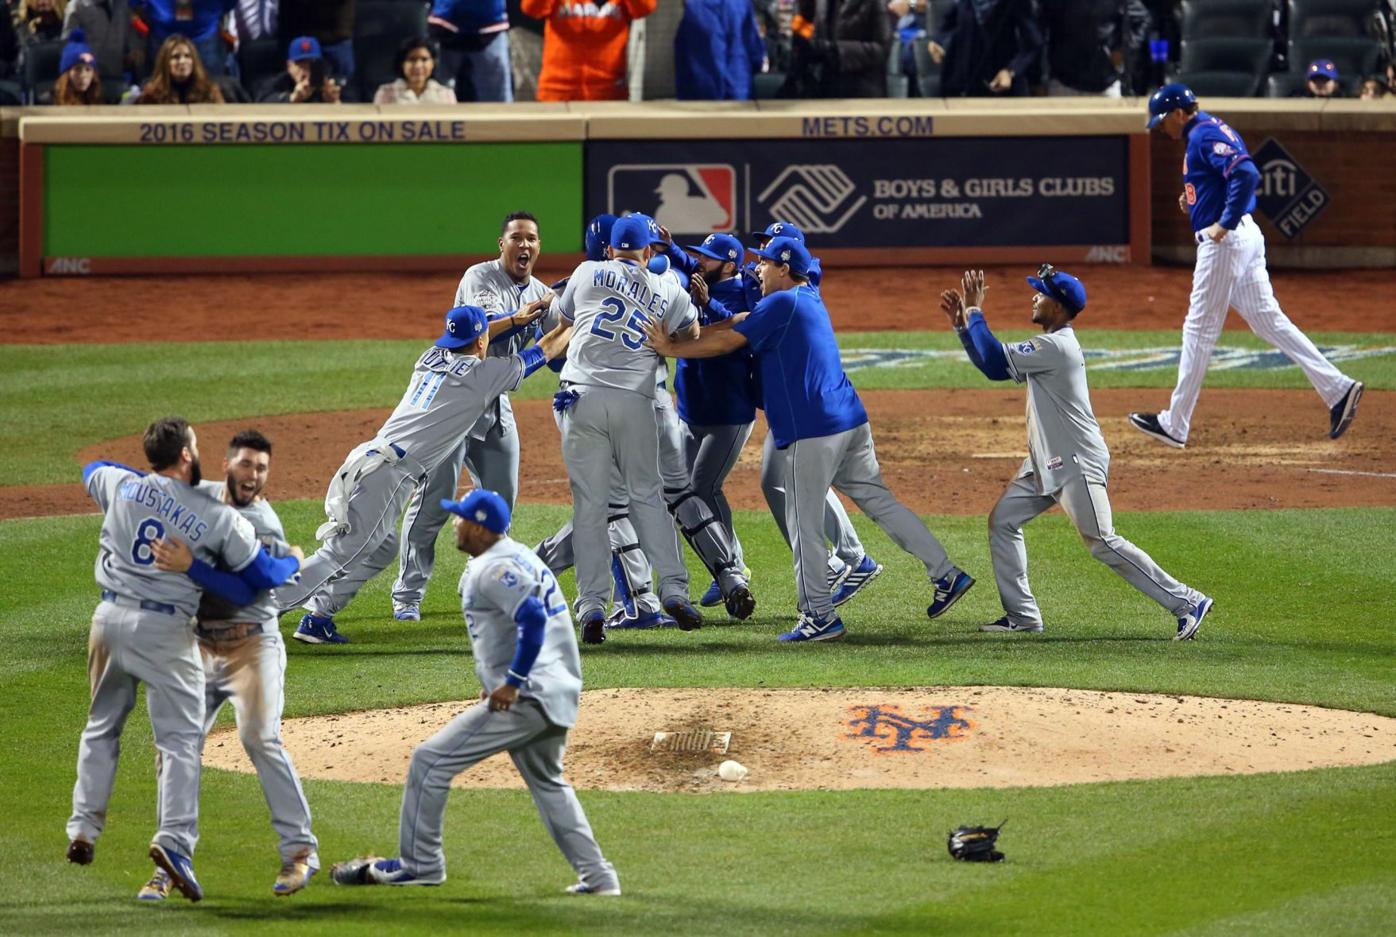 Royals End Mets' Season with 12-Inning Win in Game 5 of World Series